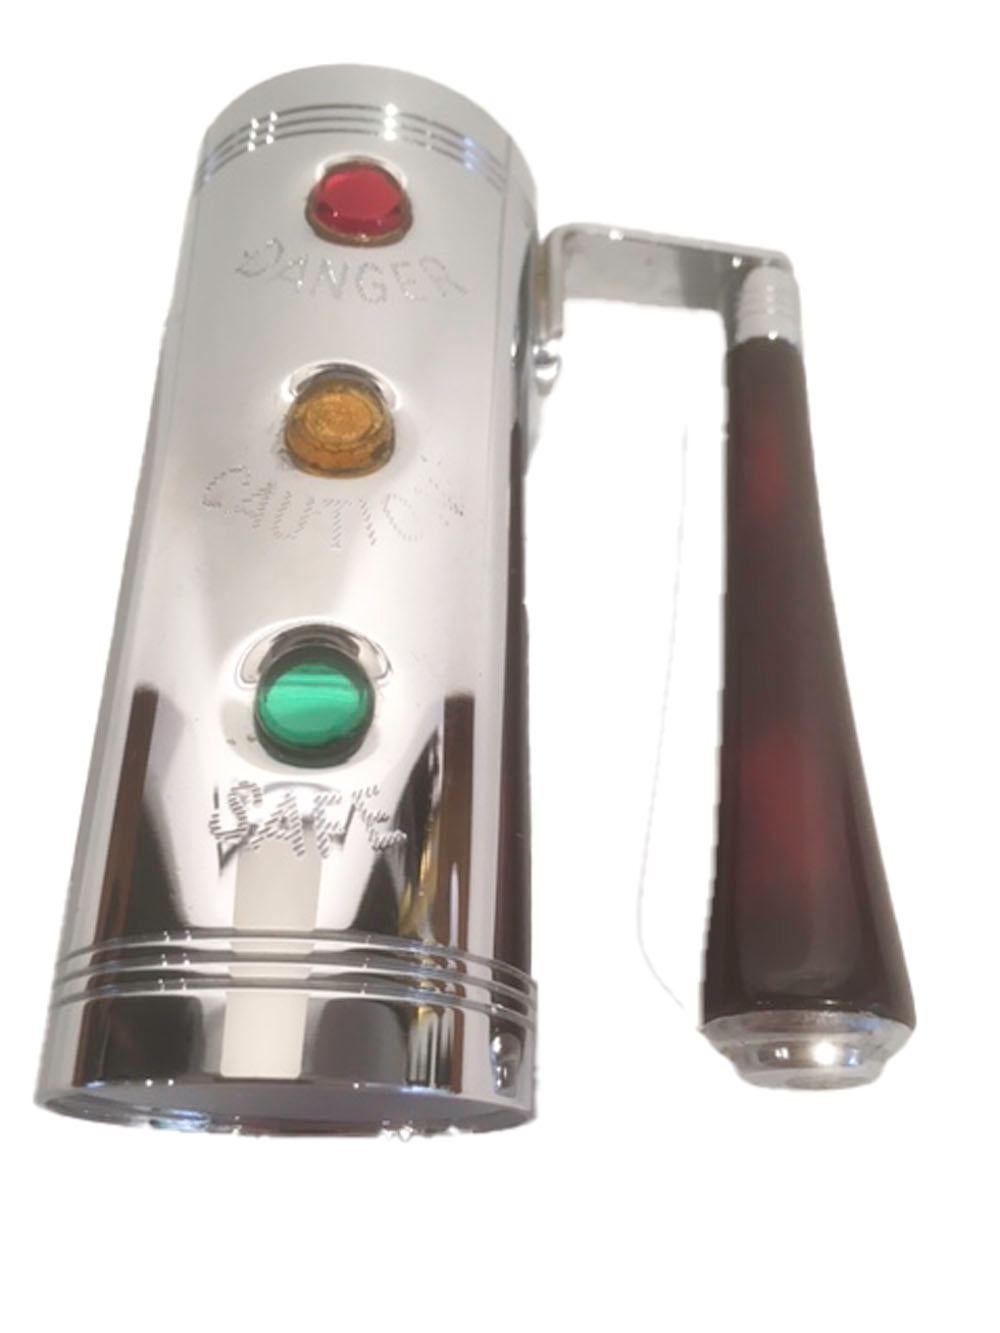 Chrome bar jigger by Glo-Hill in the form of a traffic light with a cherry red Bakelite handle. The front with red, yellow and green 